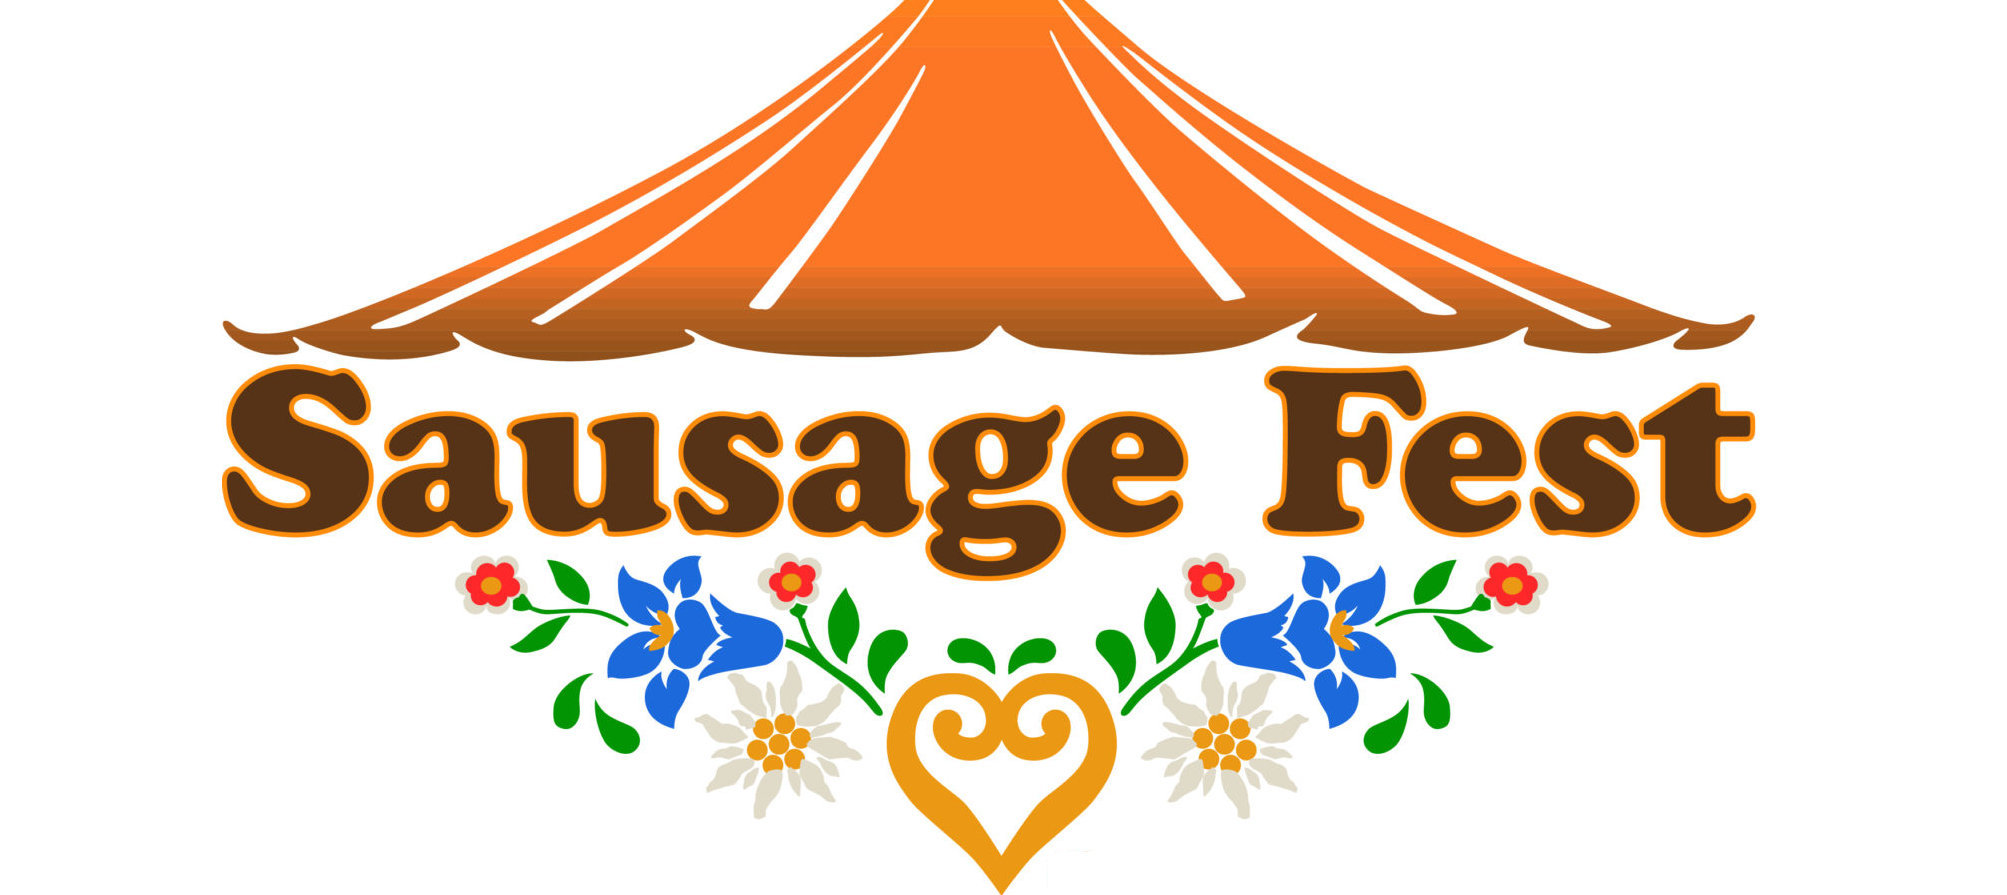 2022 Sausage Fest at Christ the King School in Richland Washington